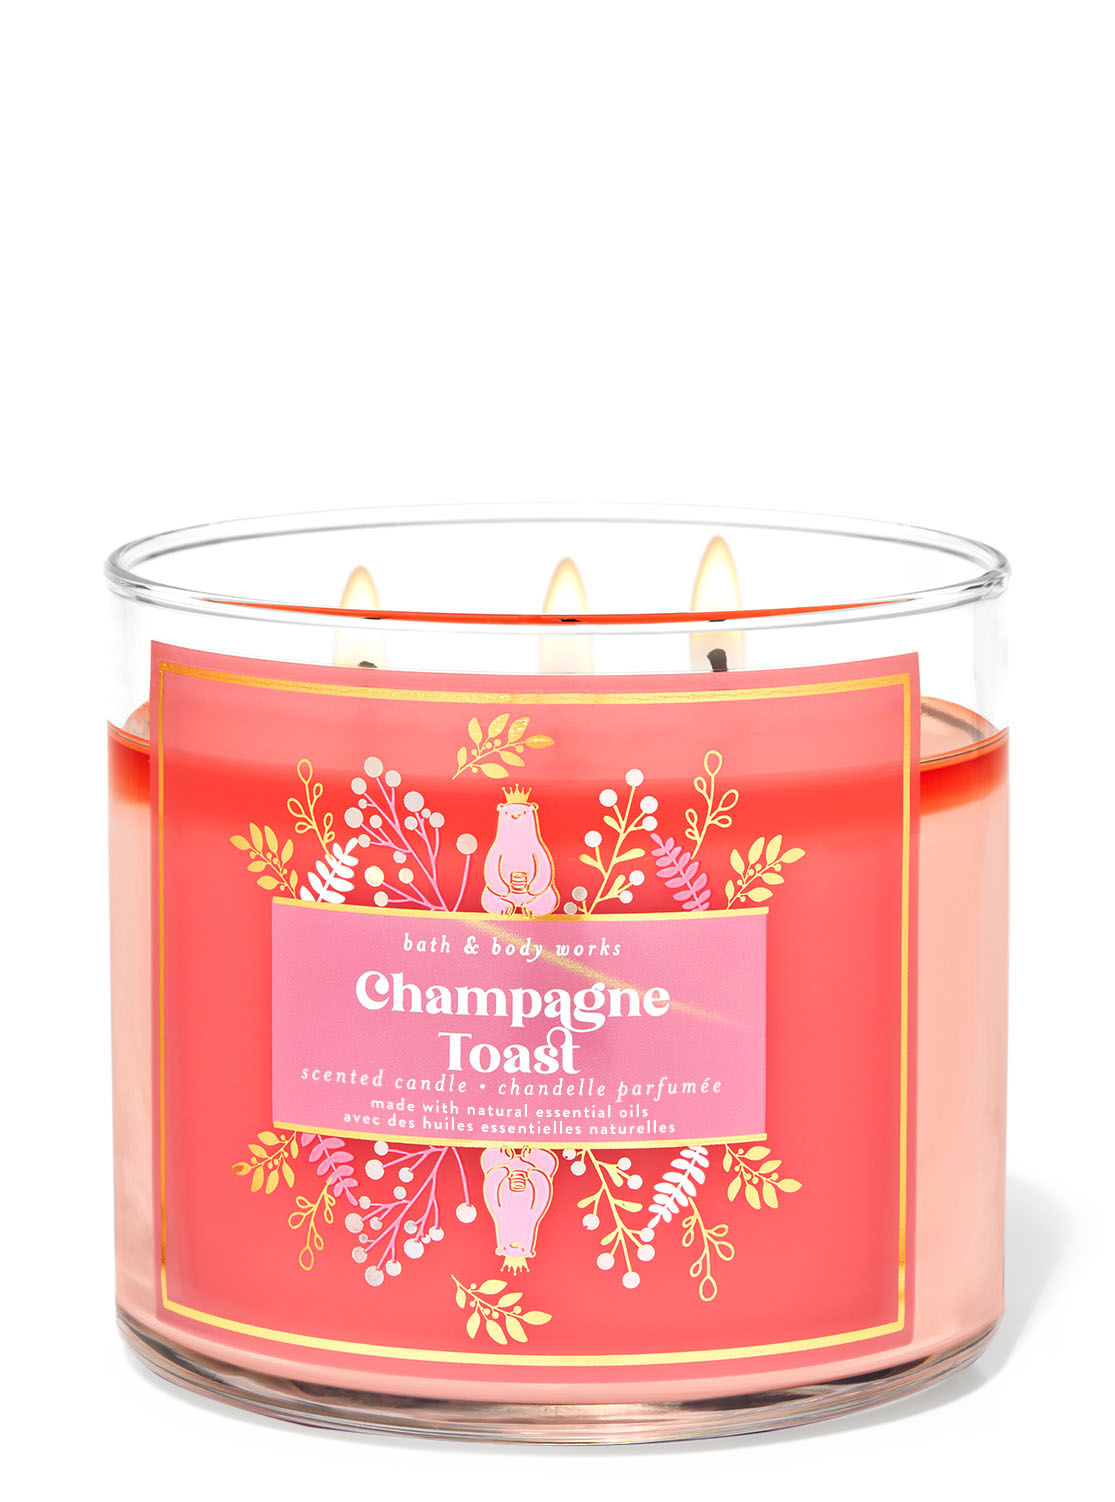 Champagne Toast 3-Wick Candle | Bath and Body Works